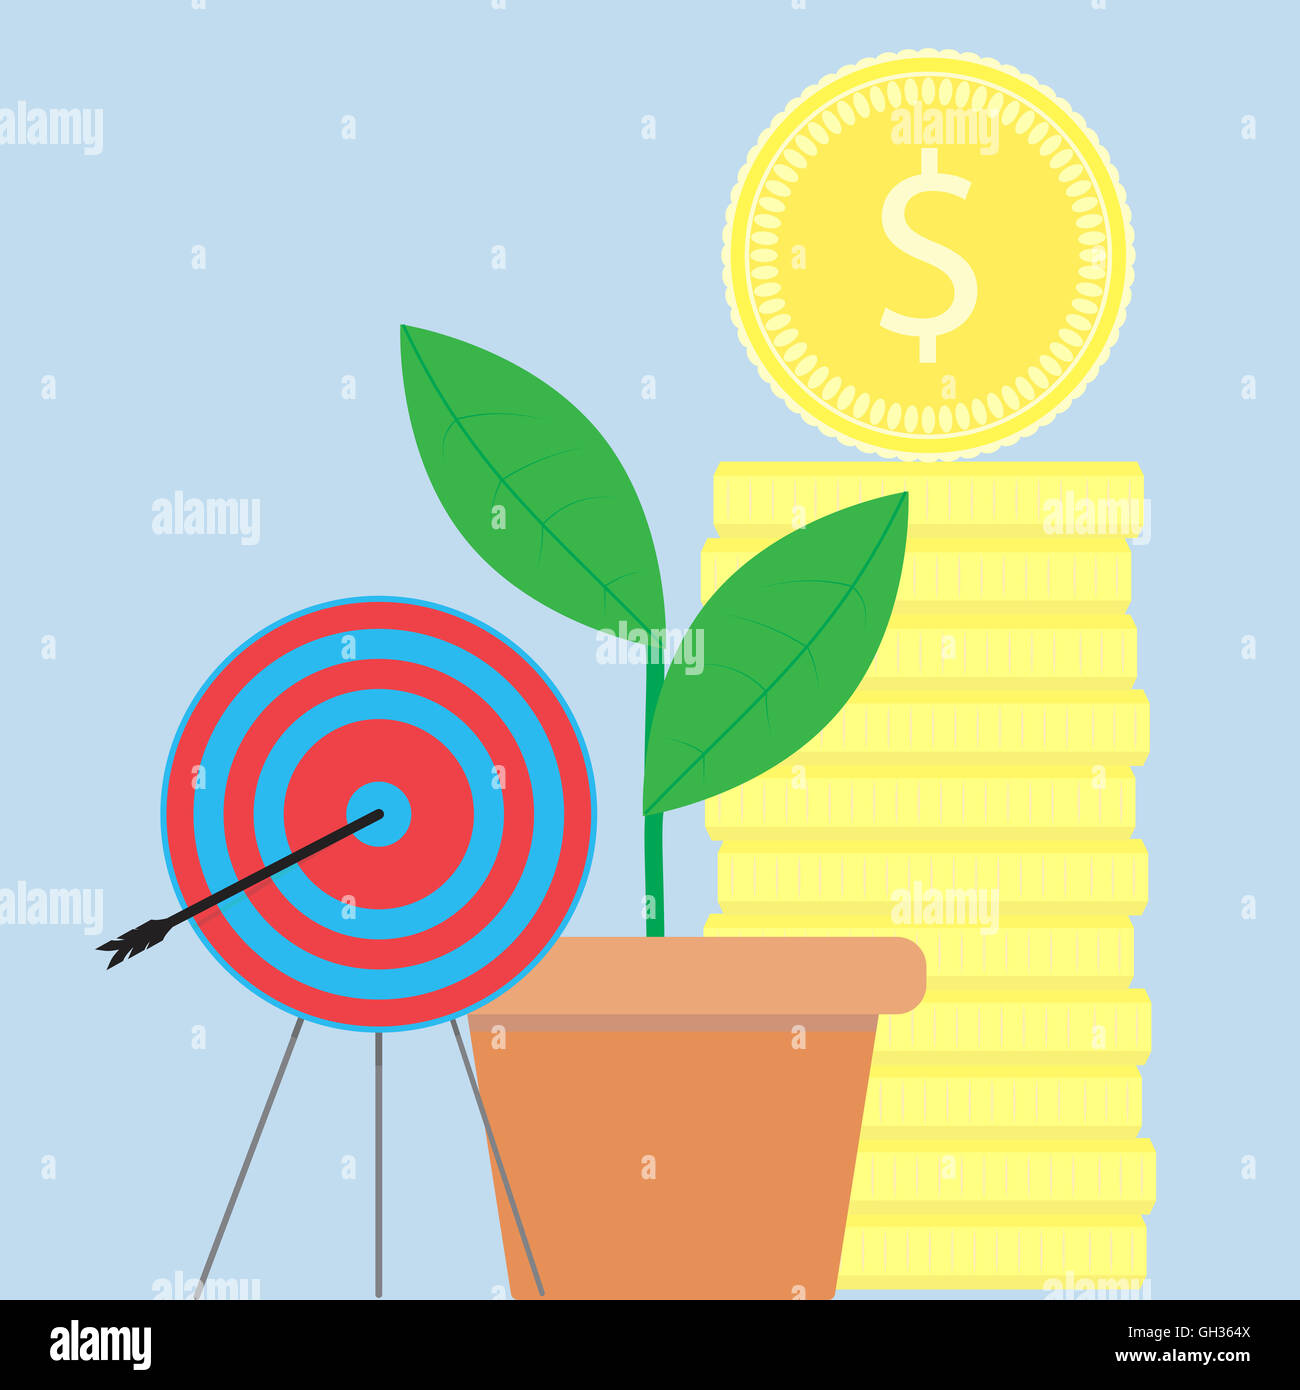 Successful startup illustration flat. Startup business metaphor, vector stock gold coins Stock Photo